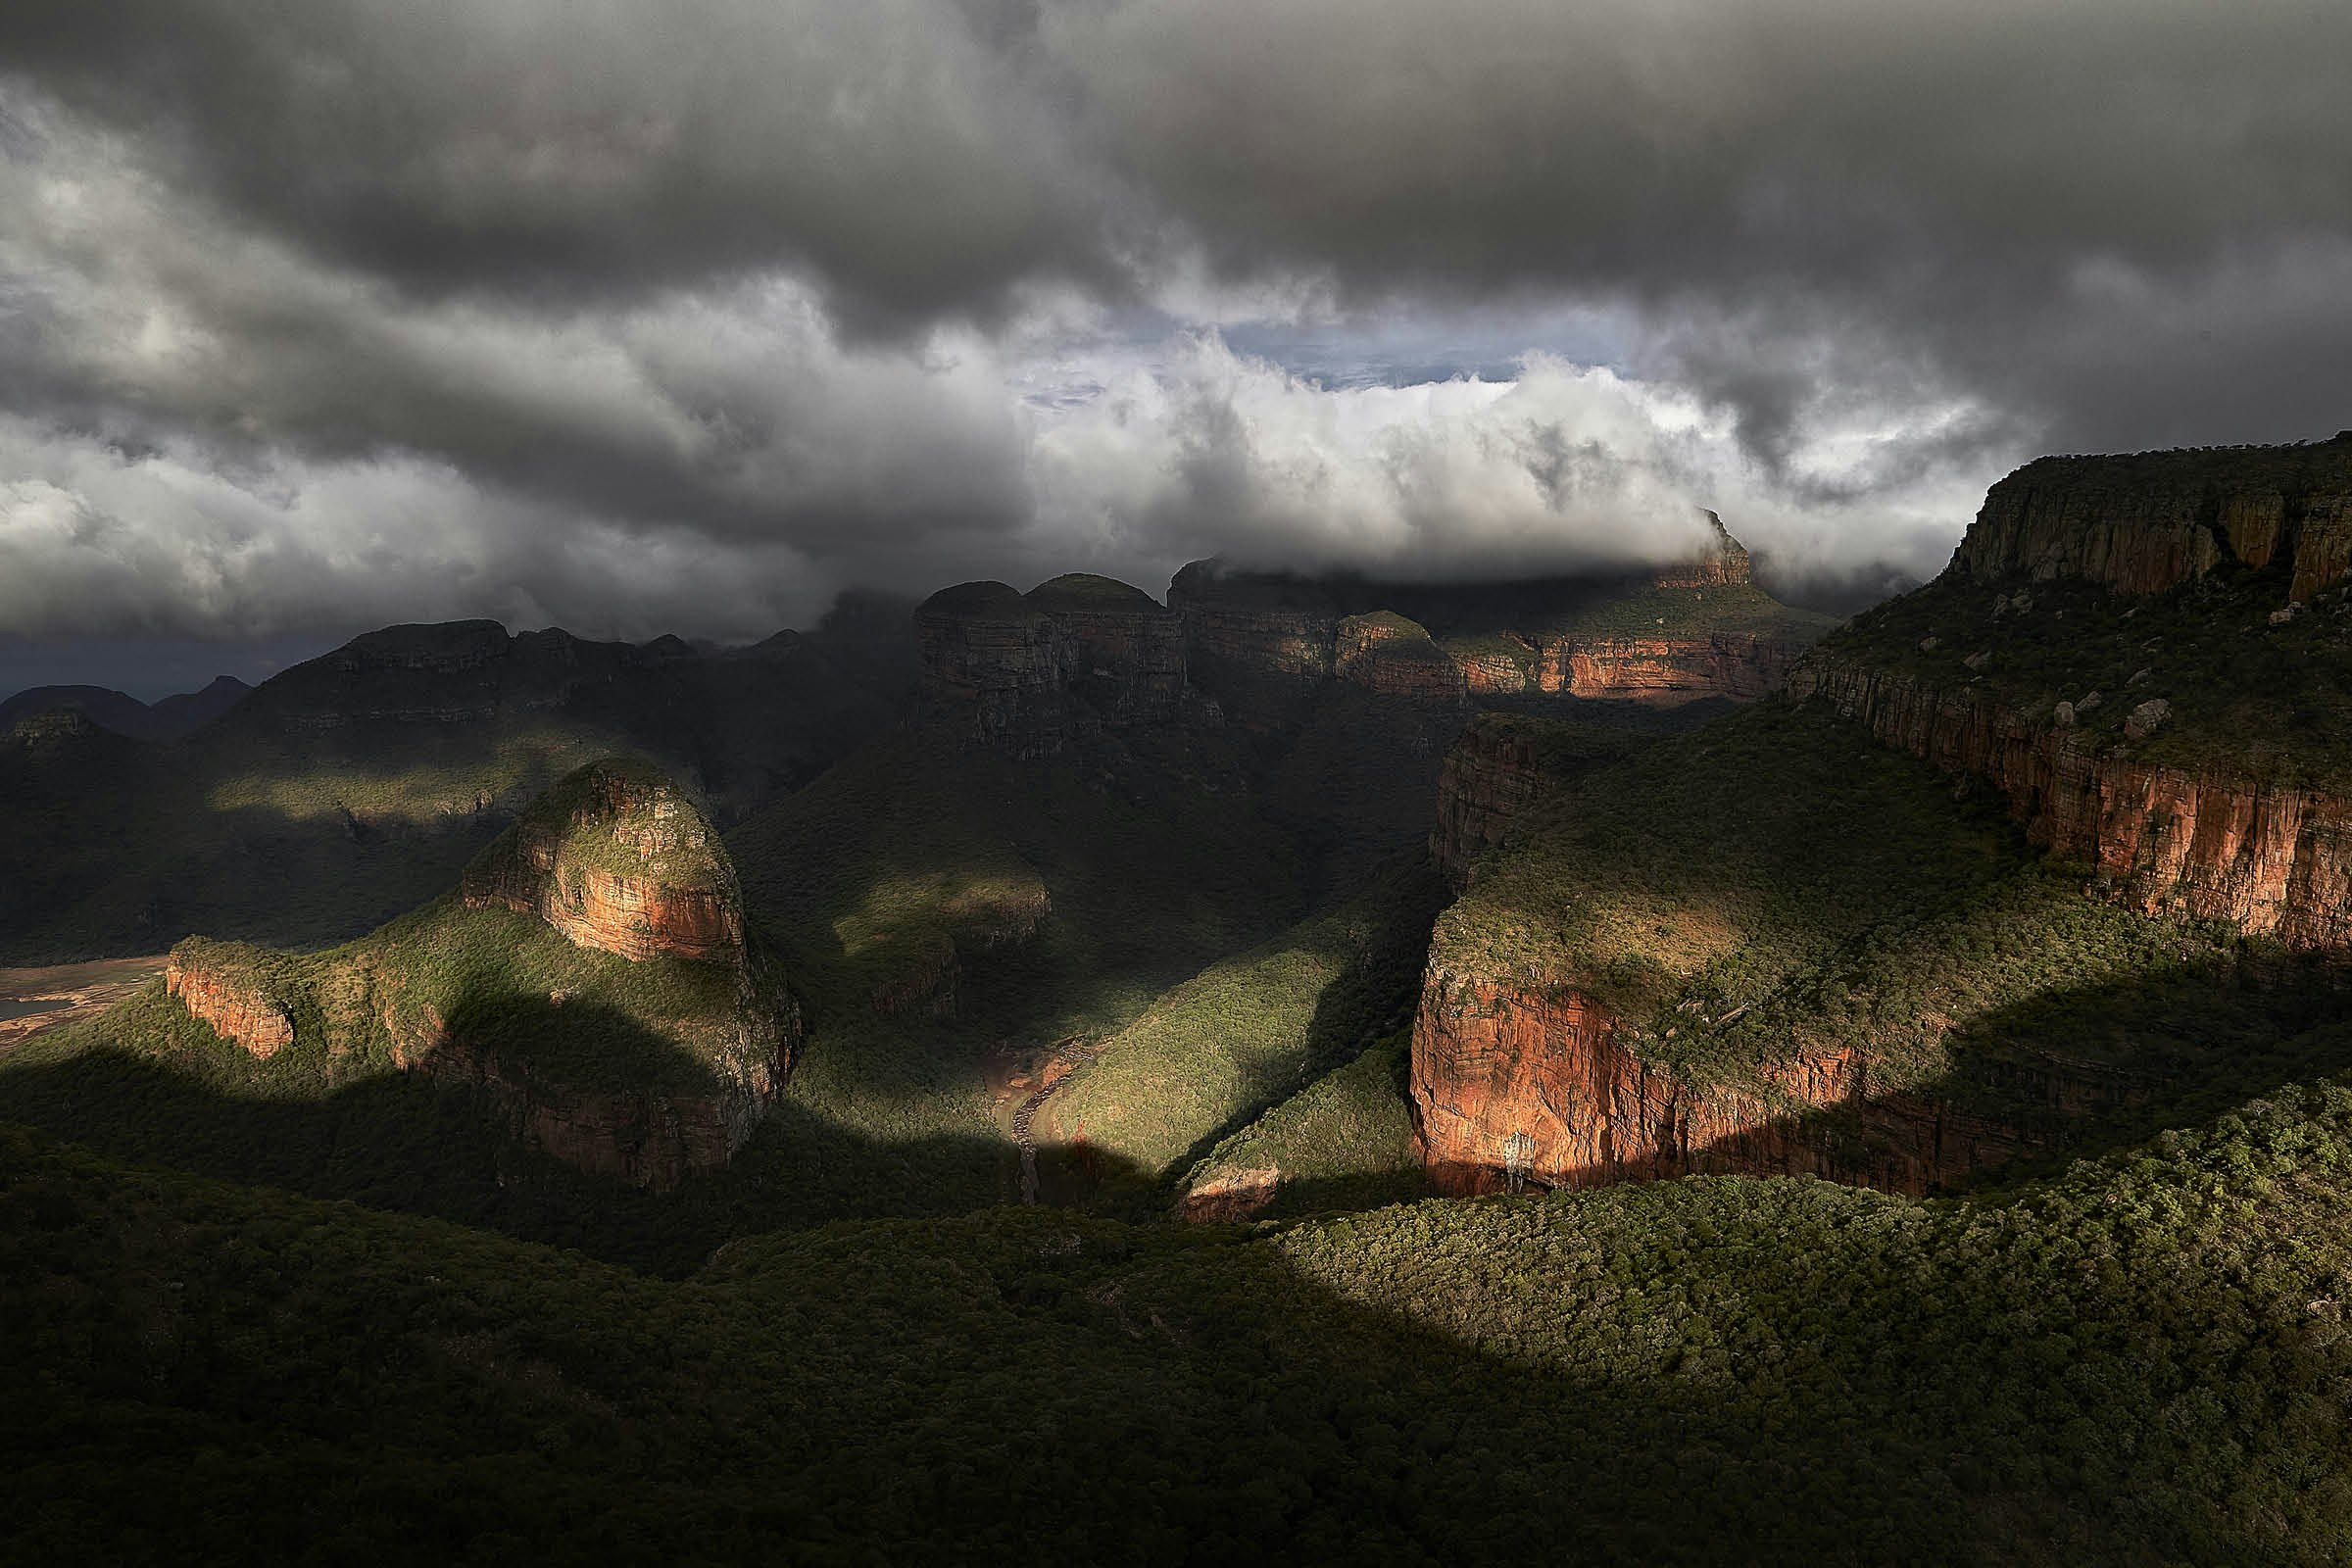 Clouds gather over the cliffs of Blyde River Canyon